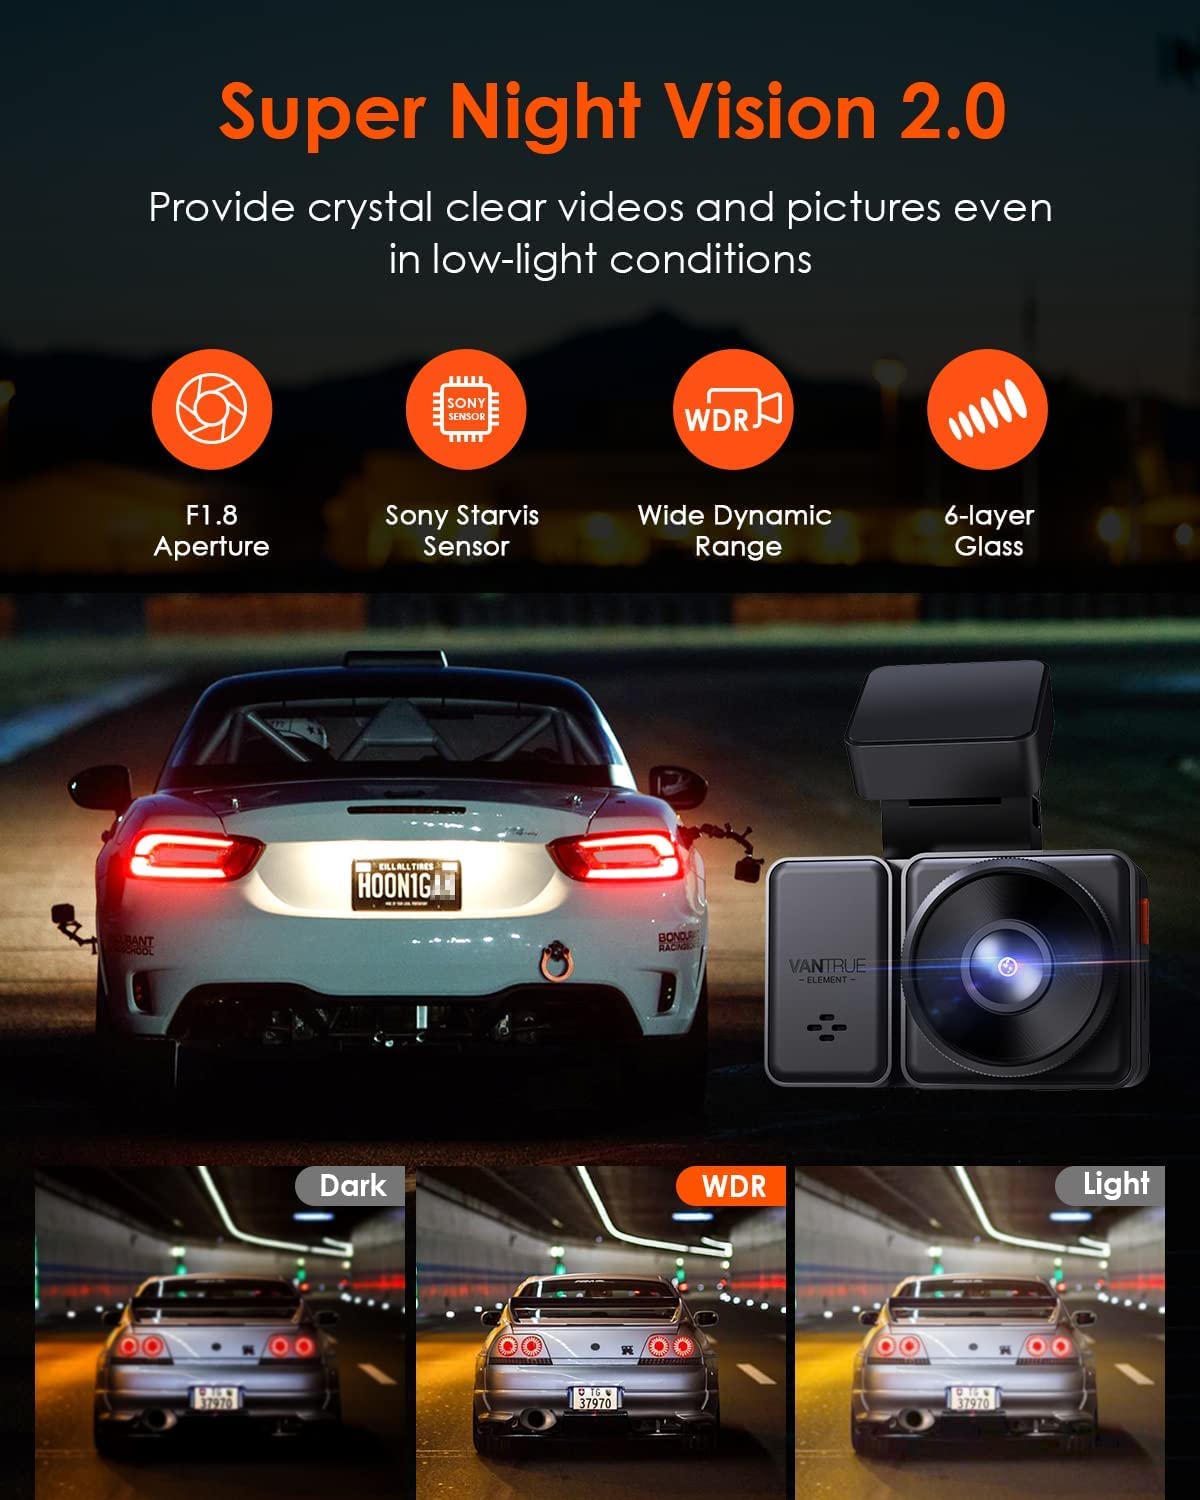 Vantrue E2 Dash Cam Front and Rear with Voice Control, 2.7K + 2.7K Dual Dash Camera for Cars, WiFi, GPS, STARVIS Night Vision, Buffered Parking Mode, G-Sensor, 2.45